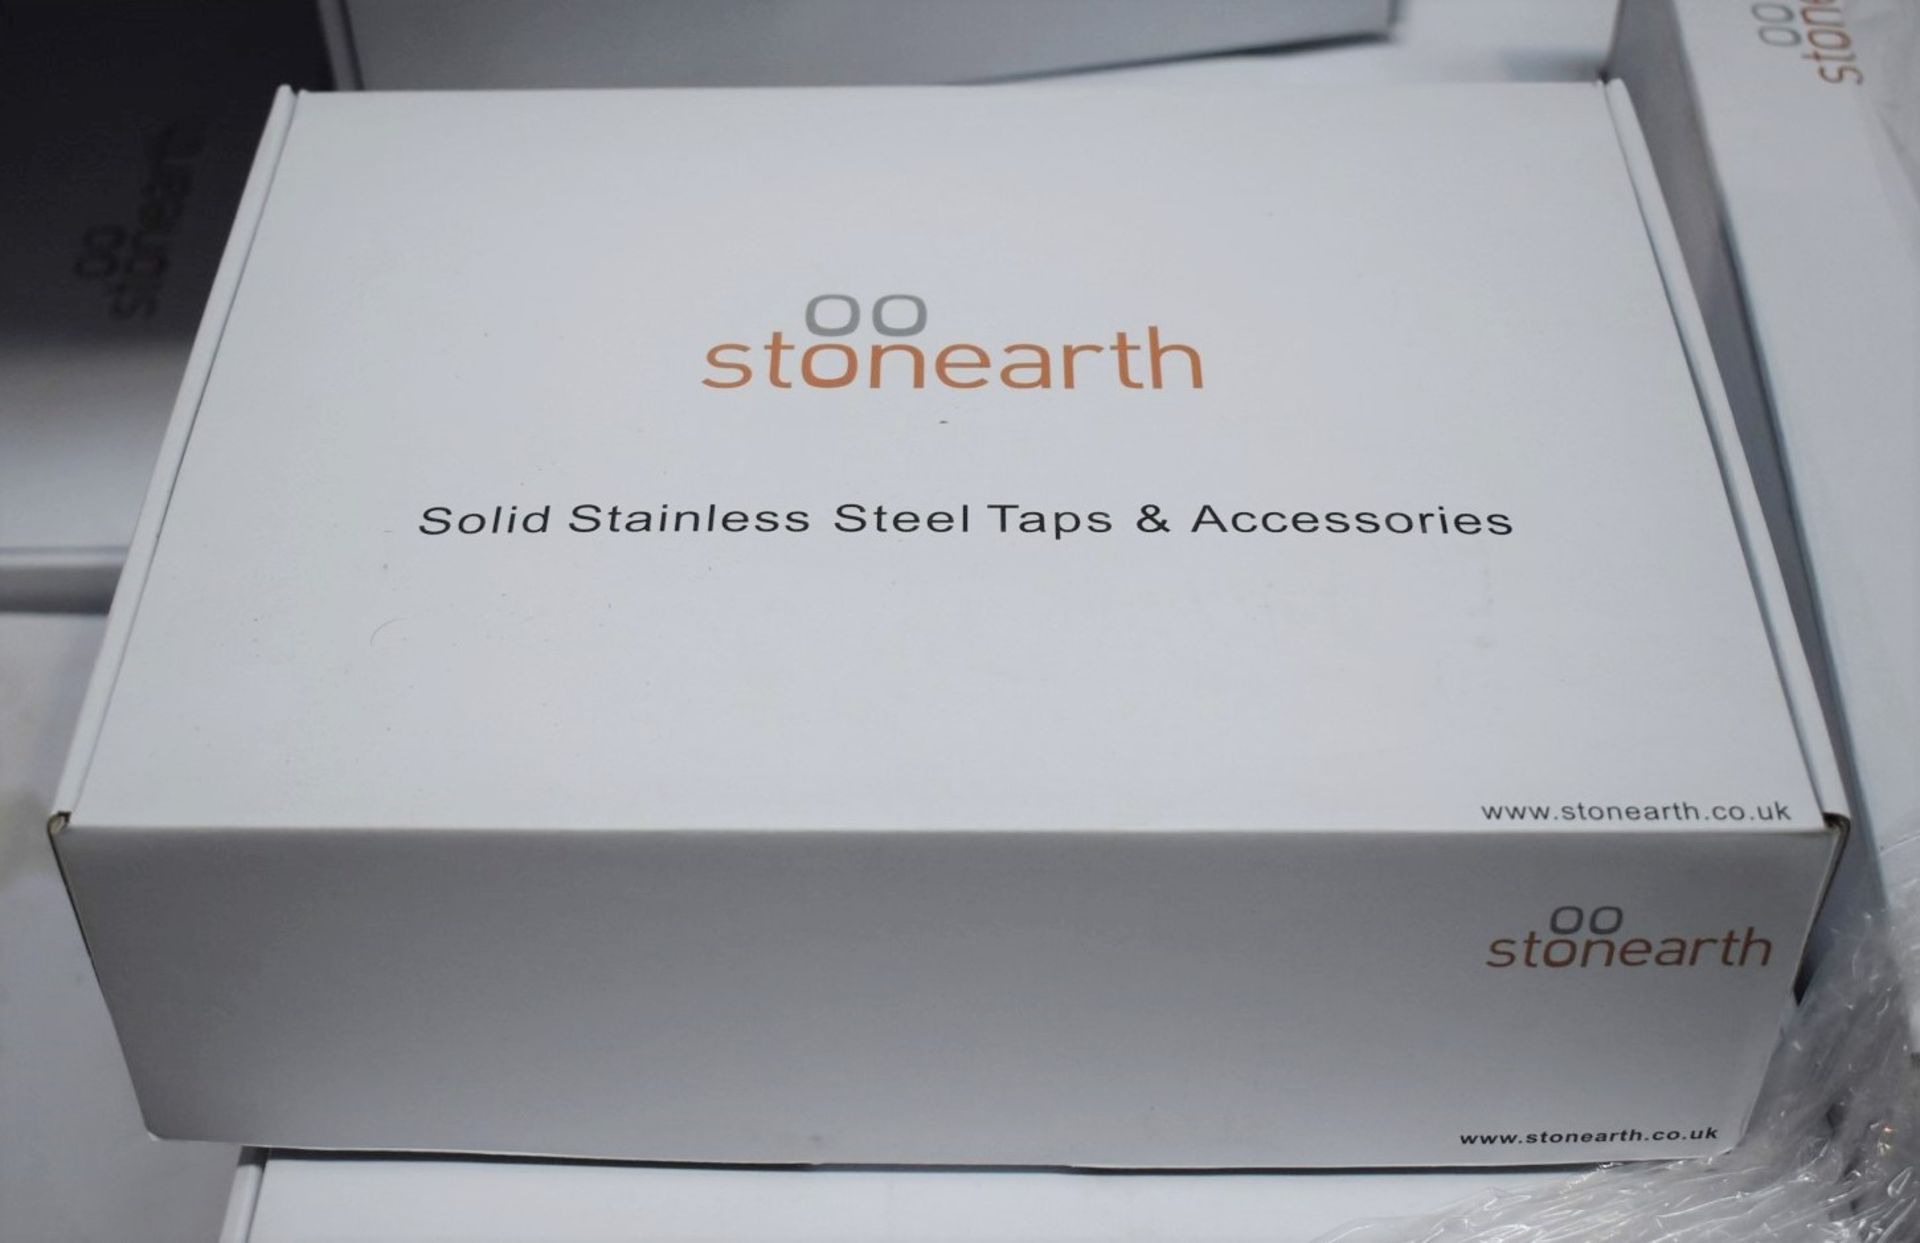 1 x Stonearth 'Metro' Stainless Steel Basin Mixer Tap - Brand New & Boxed - RRP £245 - Ref: TP821 - Image 9 of 13